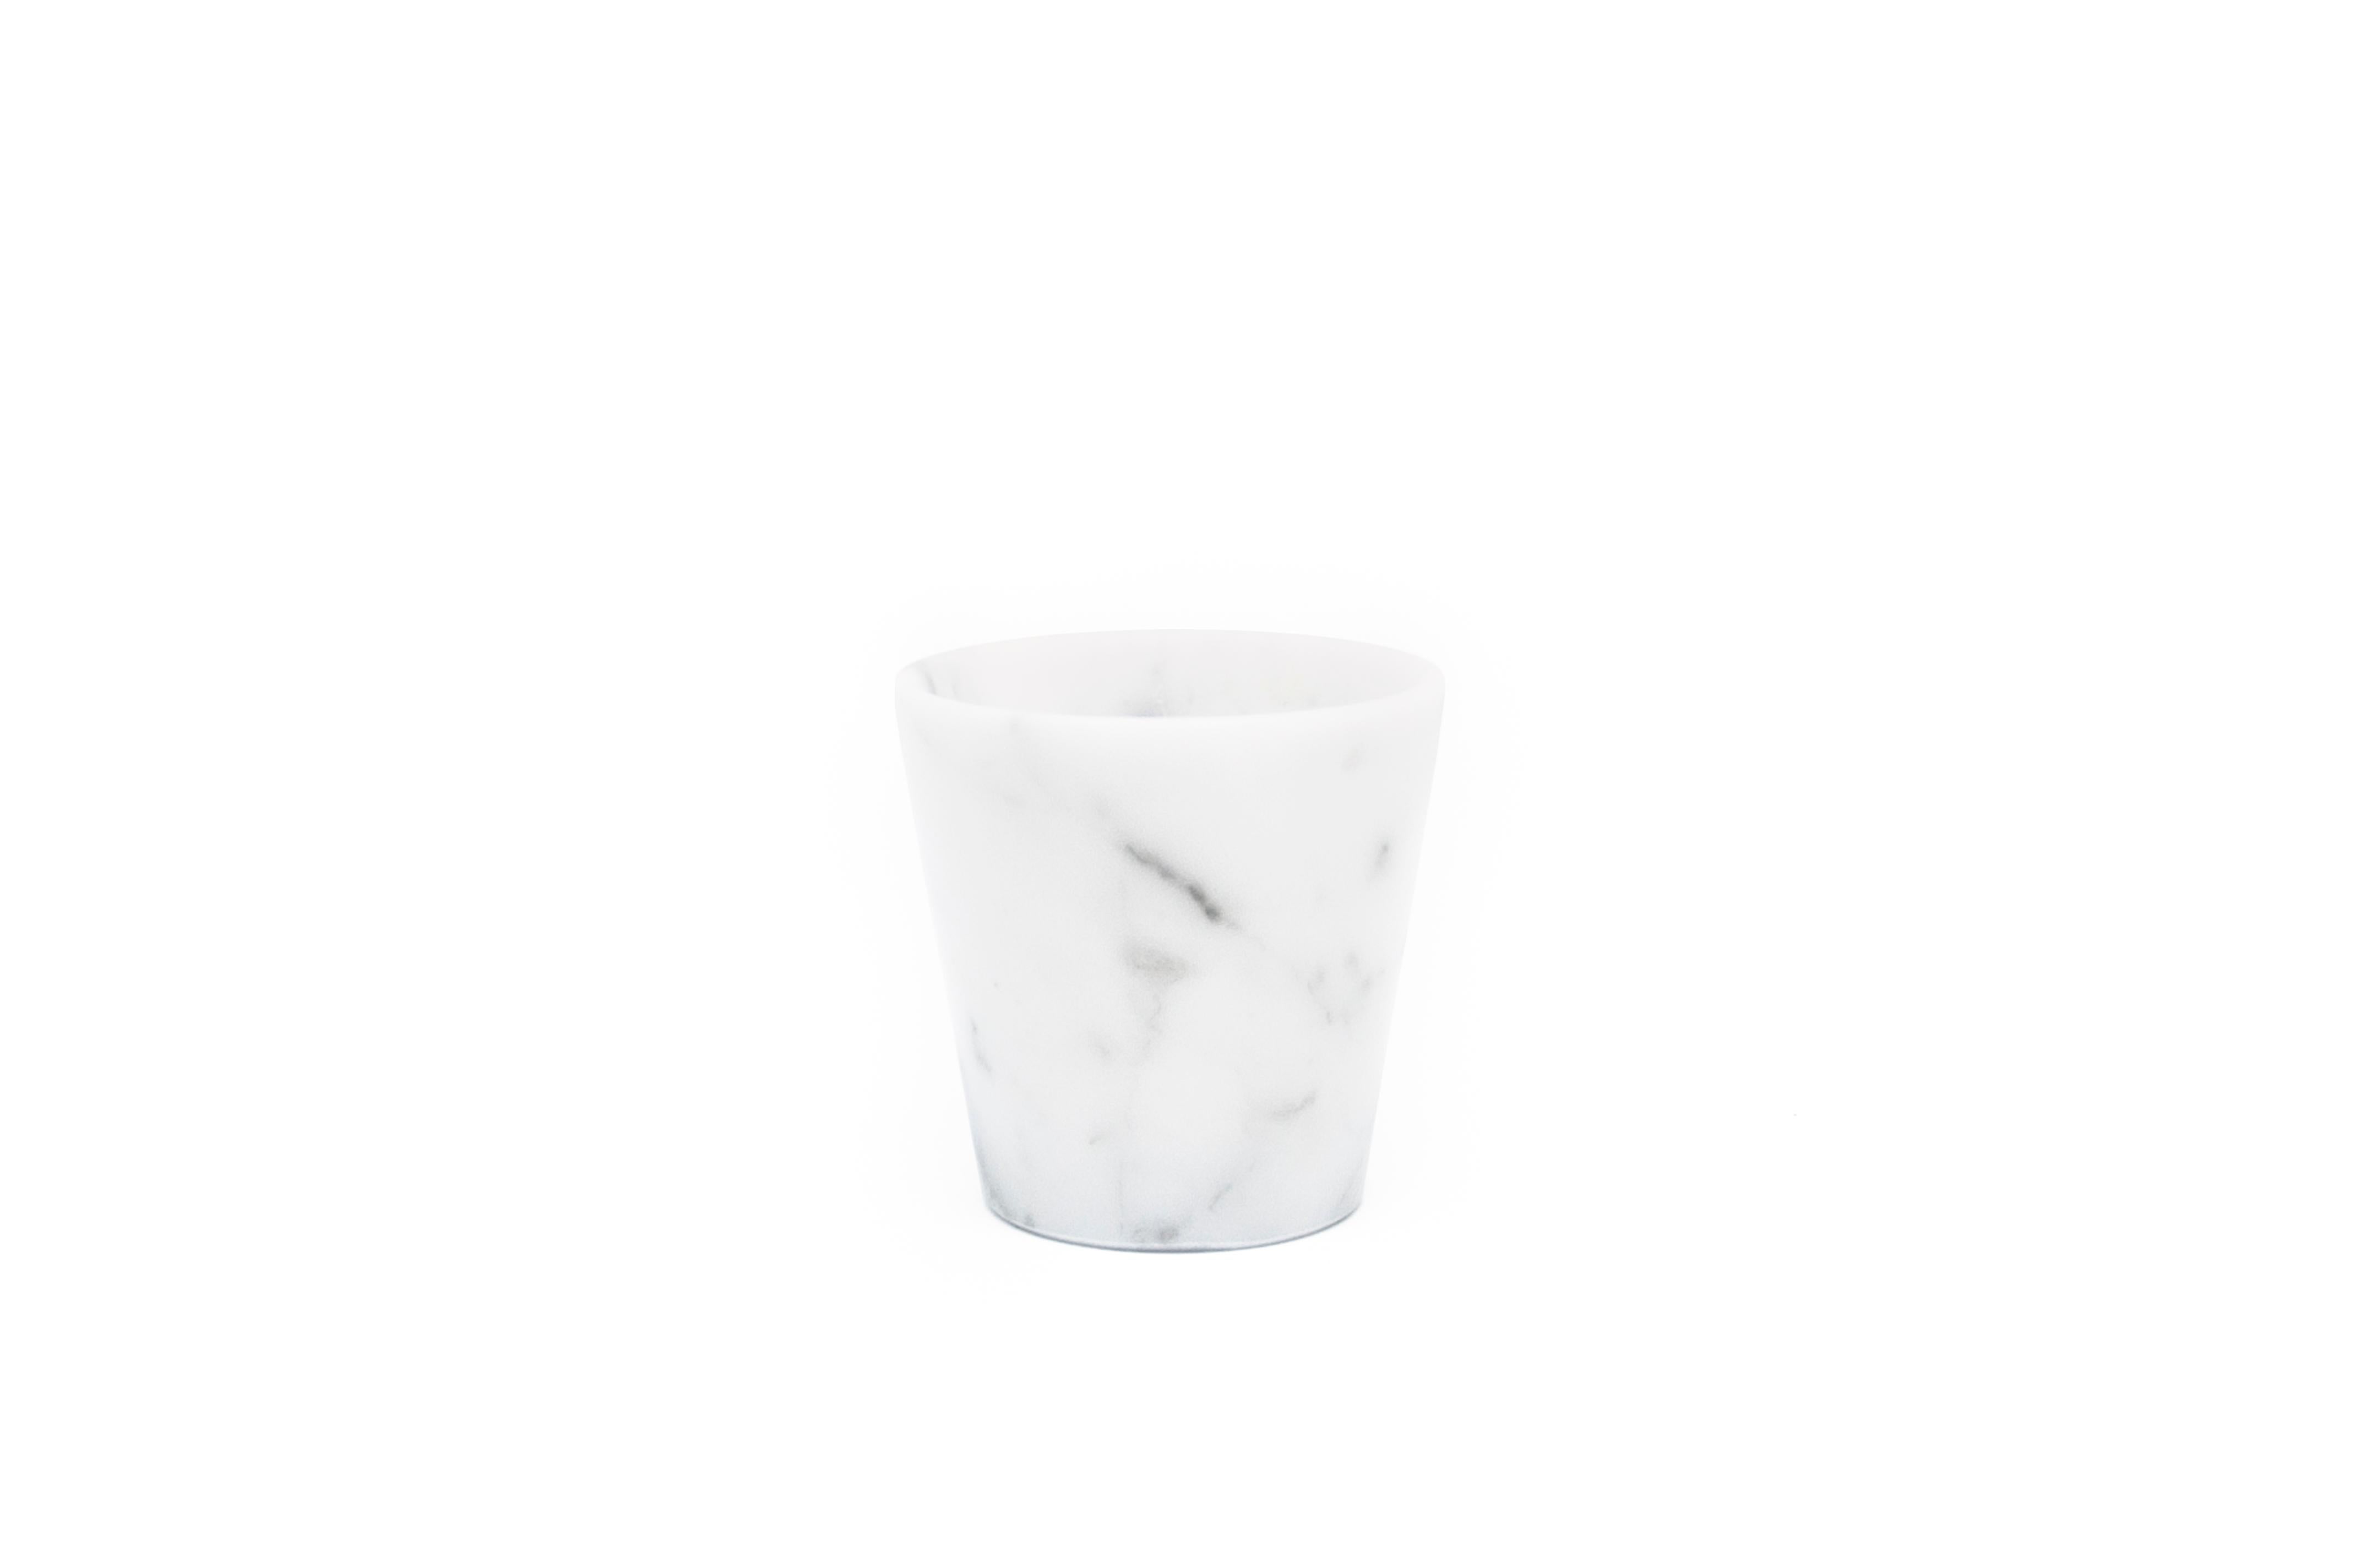 Hand-Crafted Handmade Set of 2 Grappa Glasses in Satin White Carrara Marble For Sale